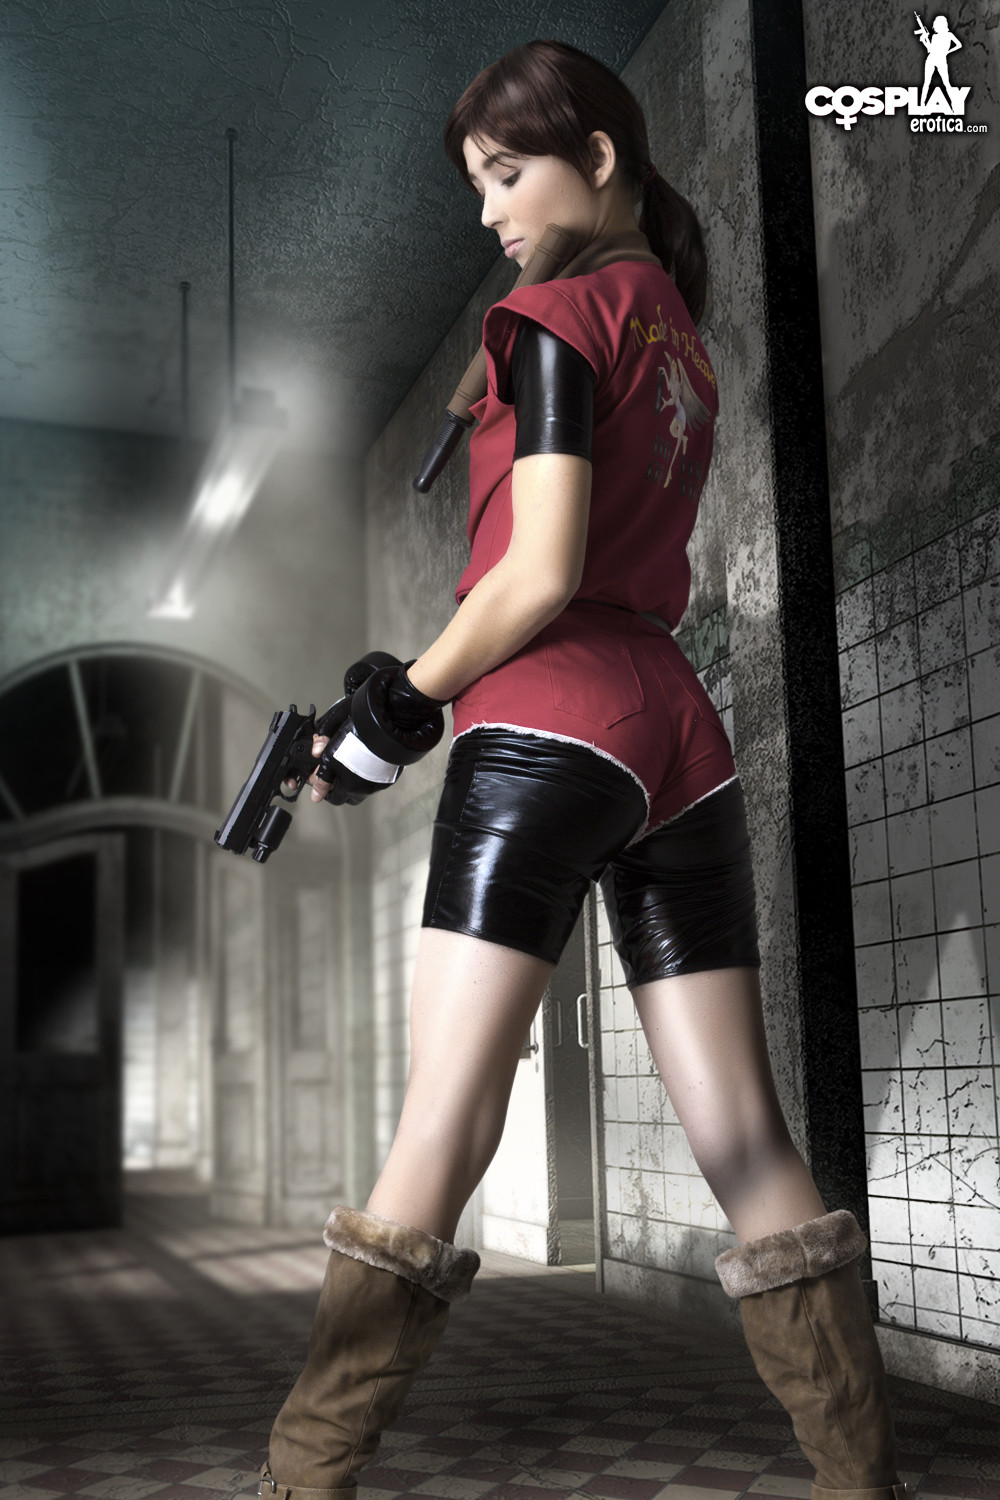 Cosplayerotica claire resident evil nudo cosplay
 #71053283